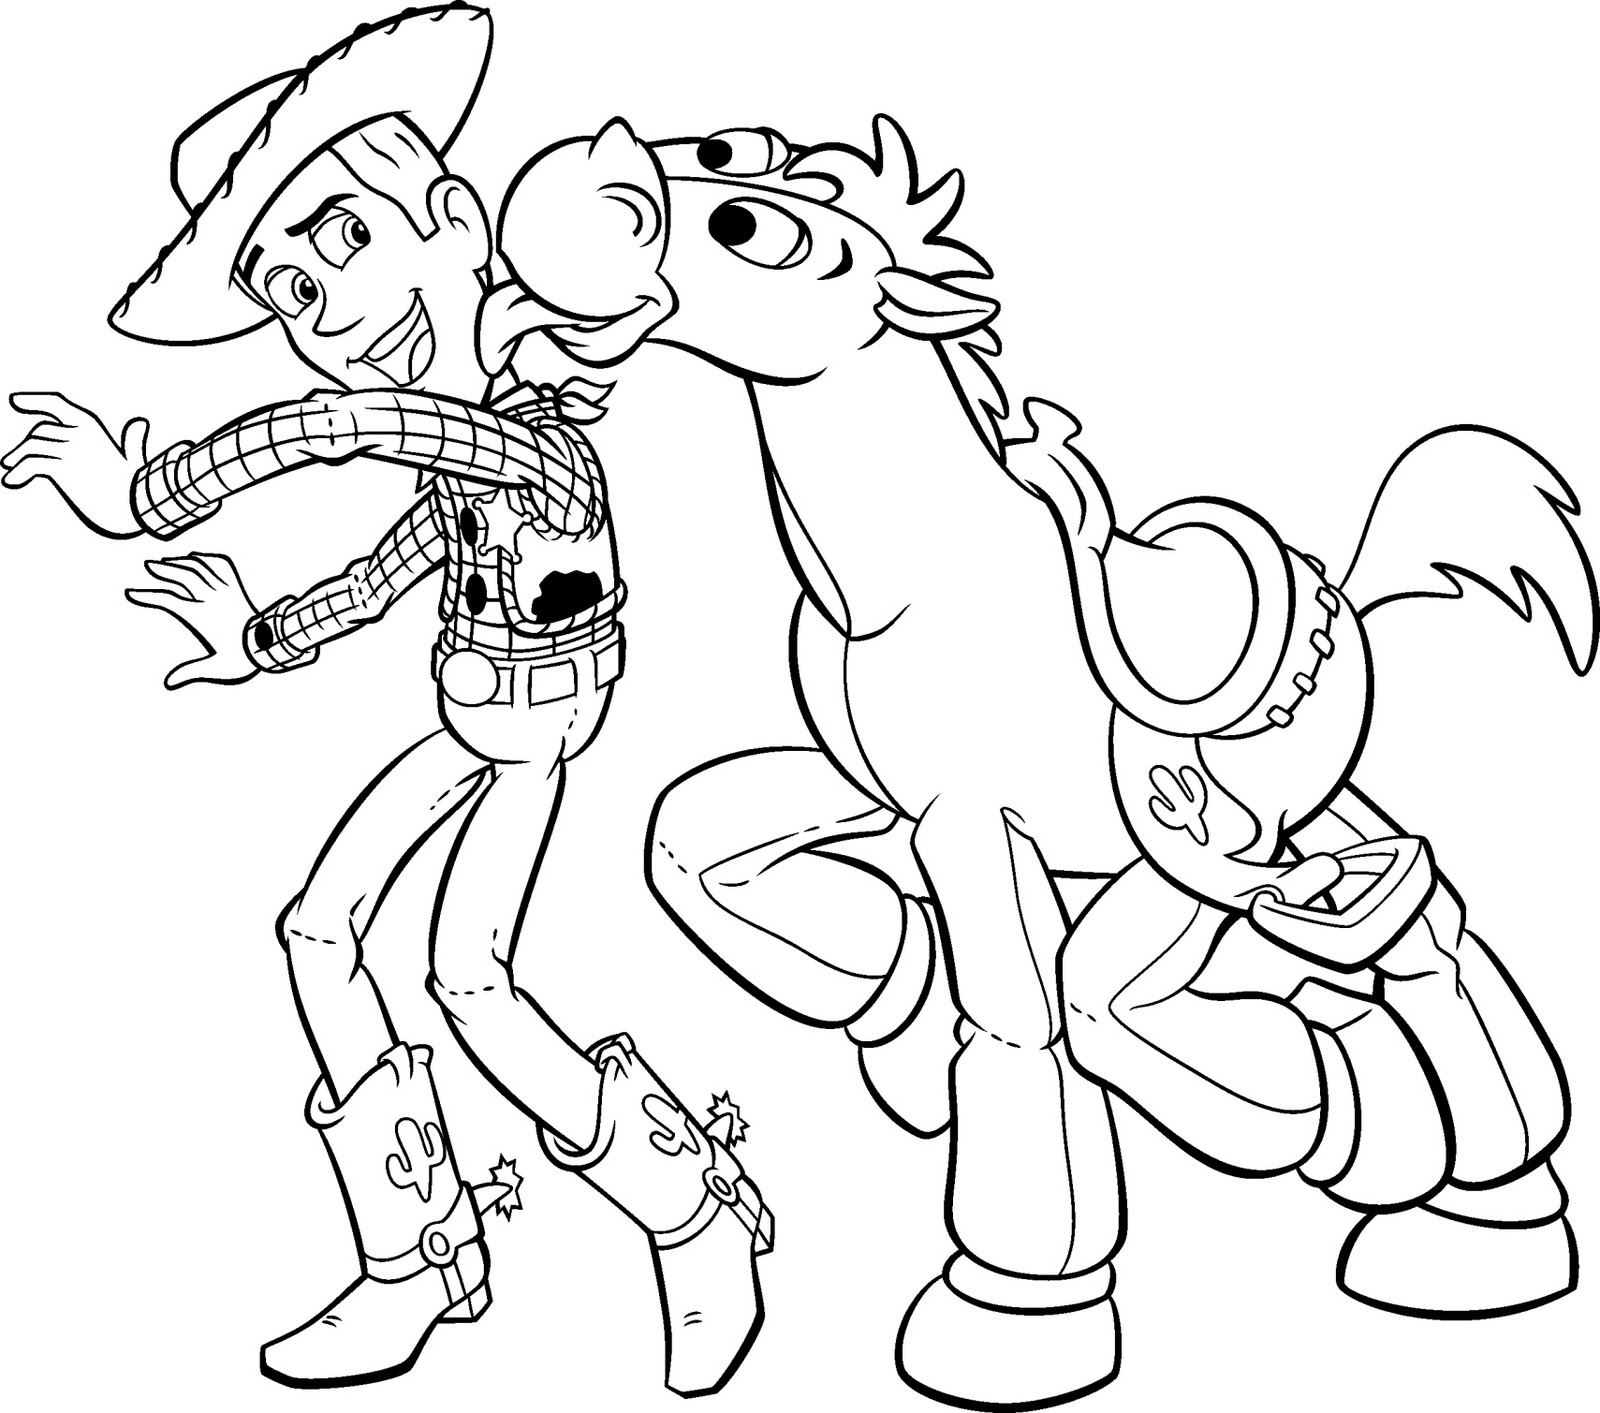 Funny Toy Story coloring page for children : Woody and Bullseye